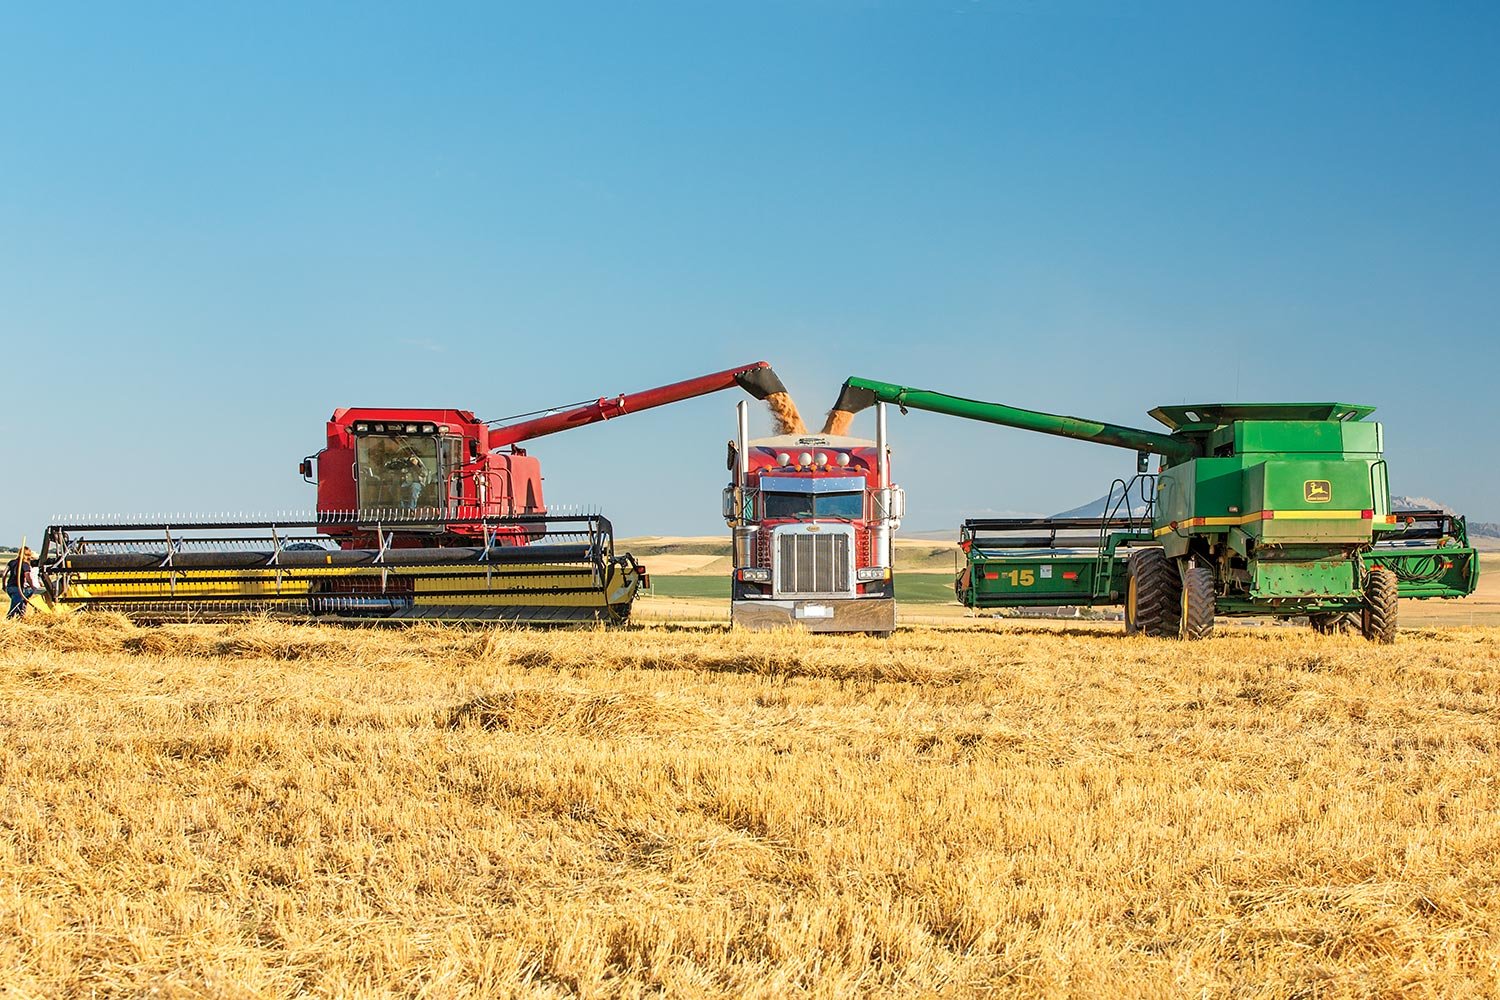 Case IH and John Deere Combines Working Together Unloading Wheat in Montana.